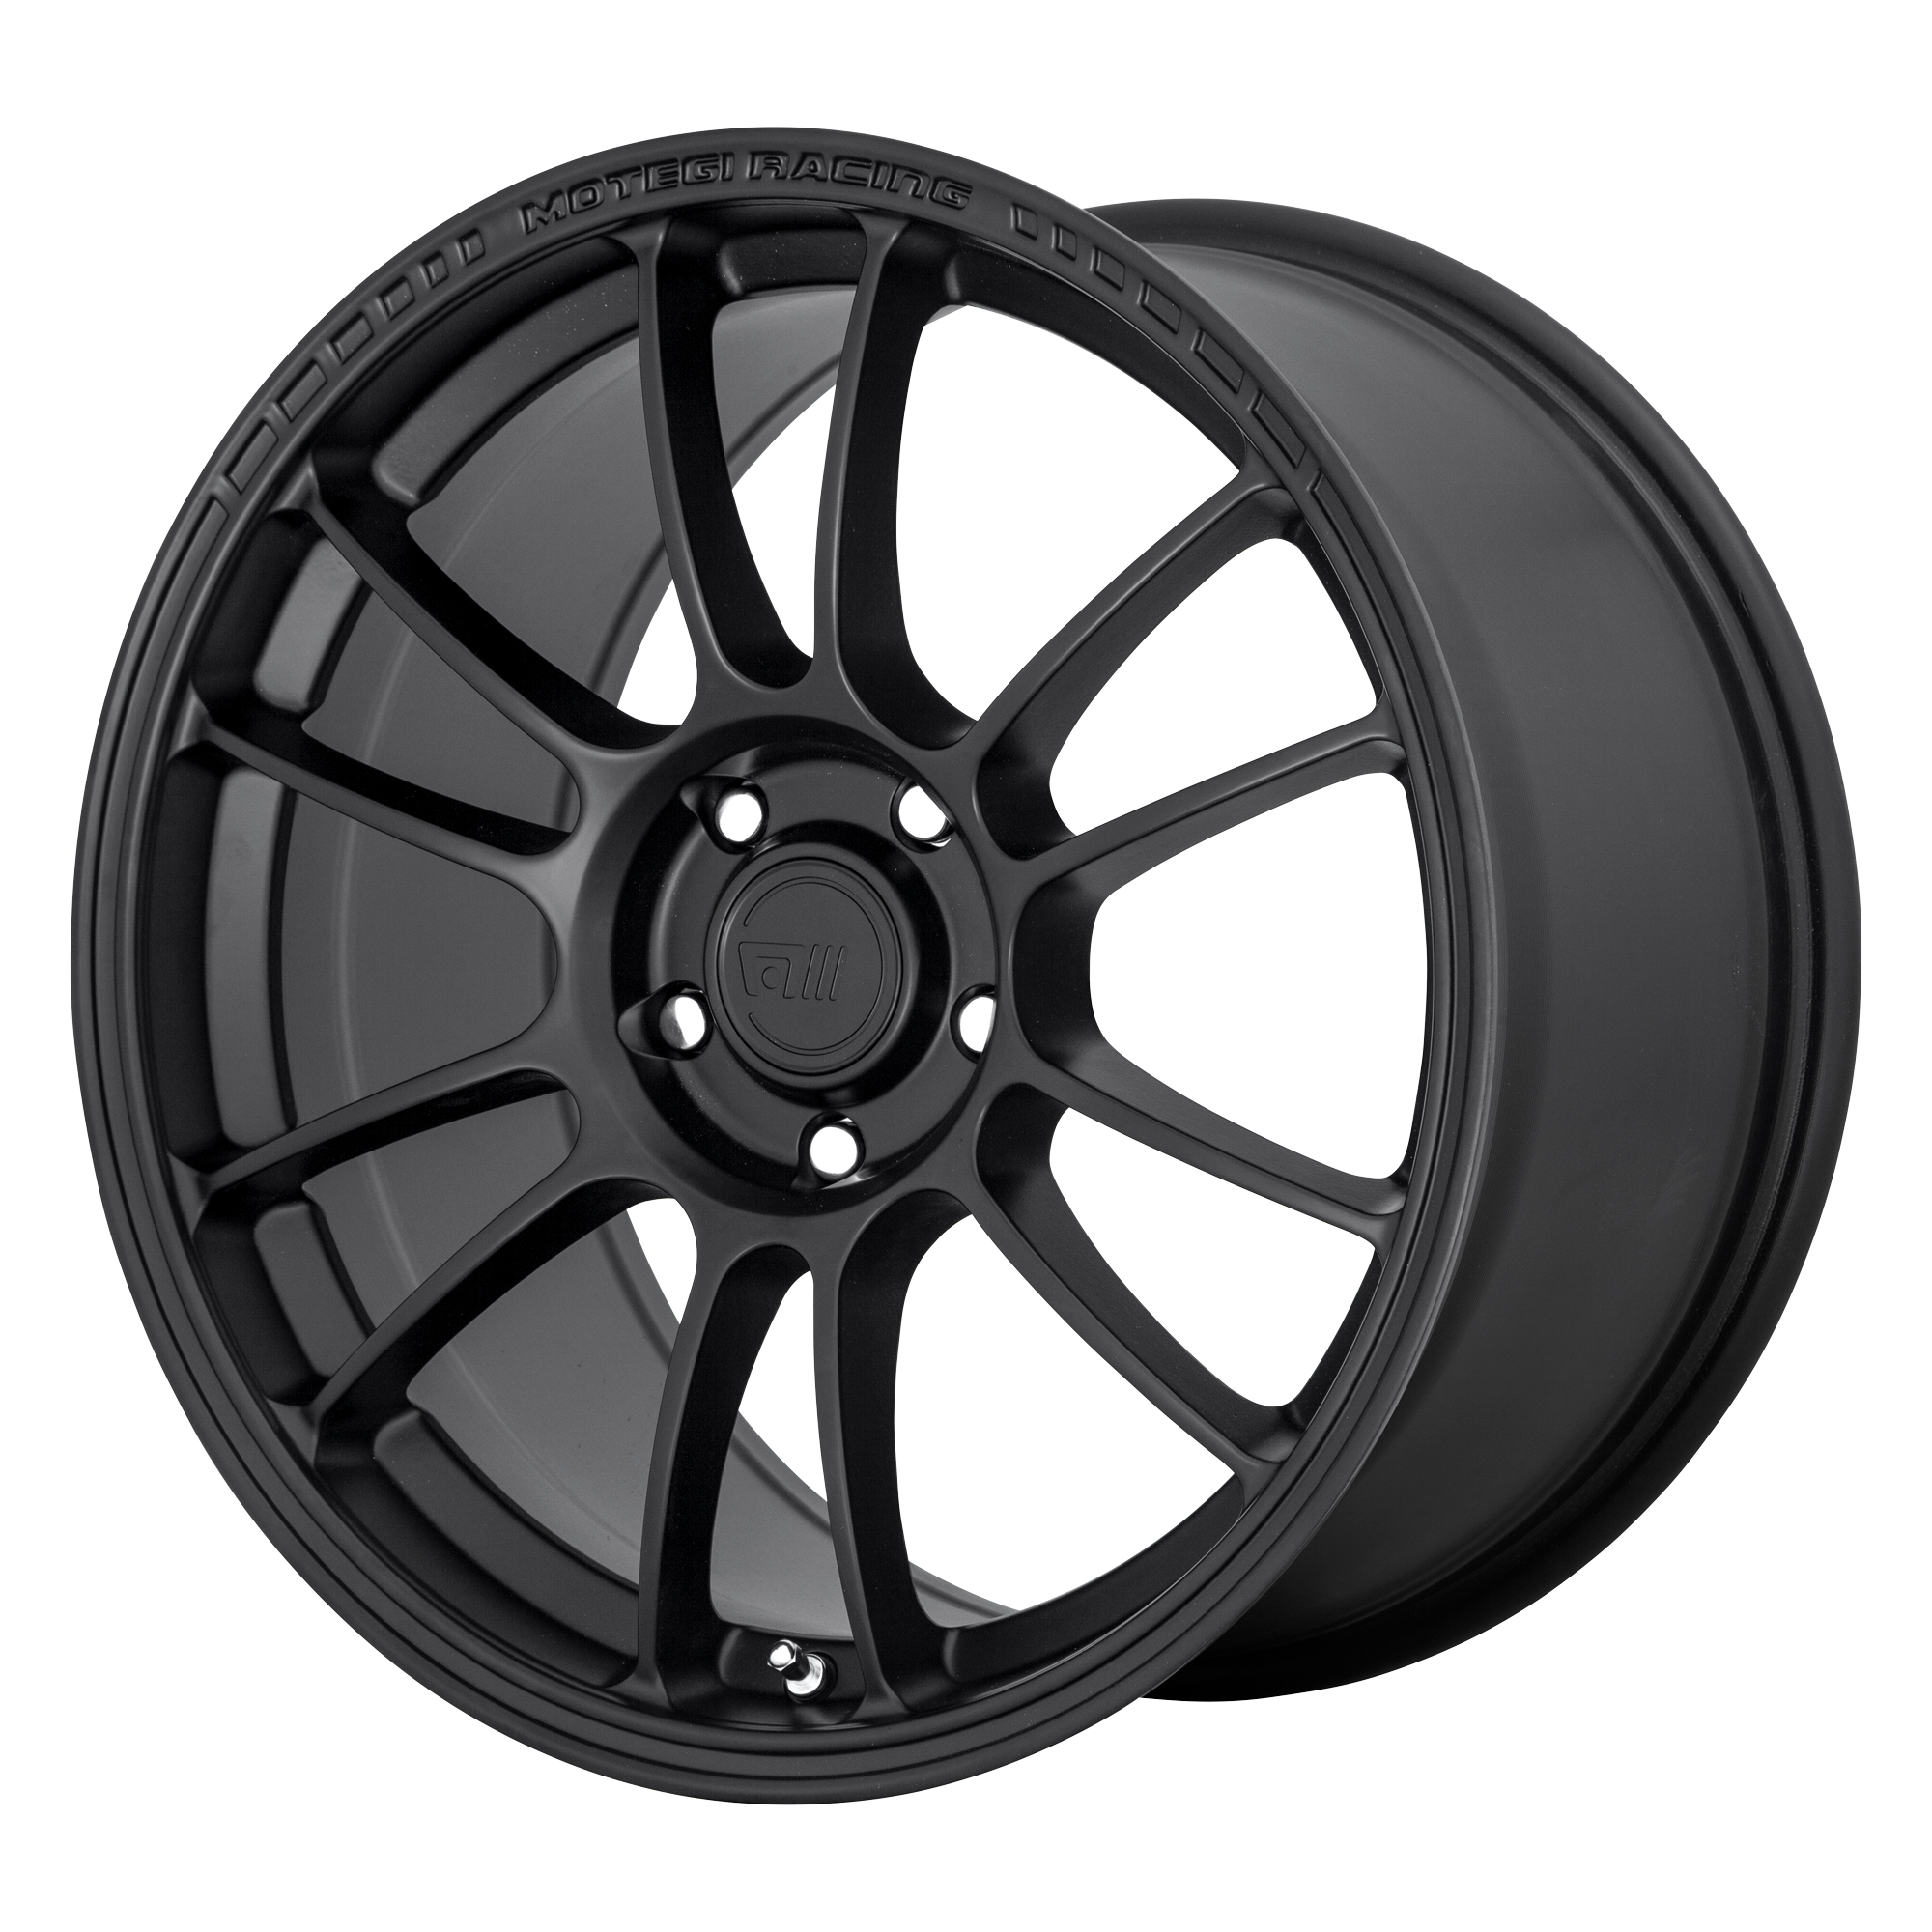 SS6 17x8.5 4x100.00 SATIN BLACK (42 mm) - Tires and Engine Performance